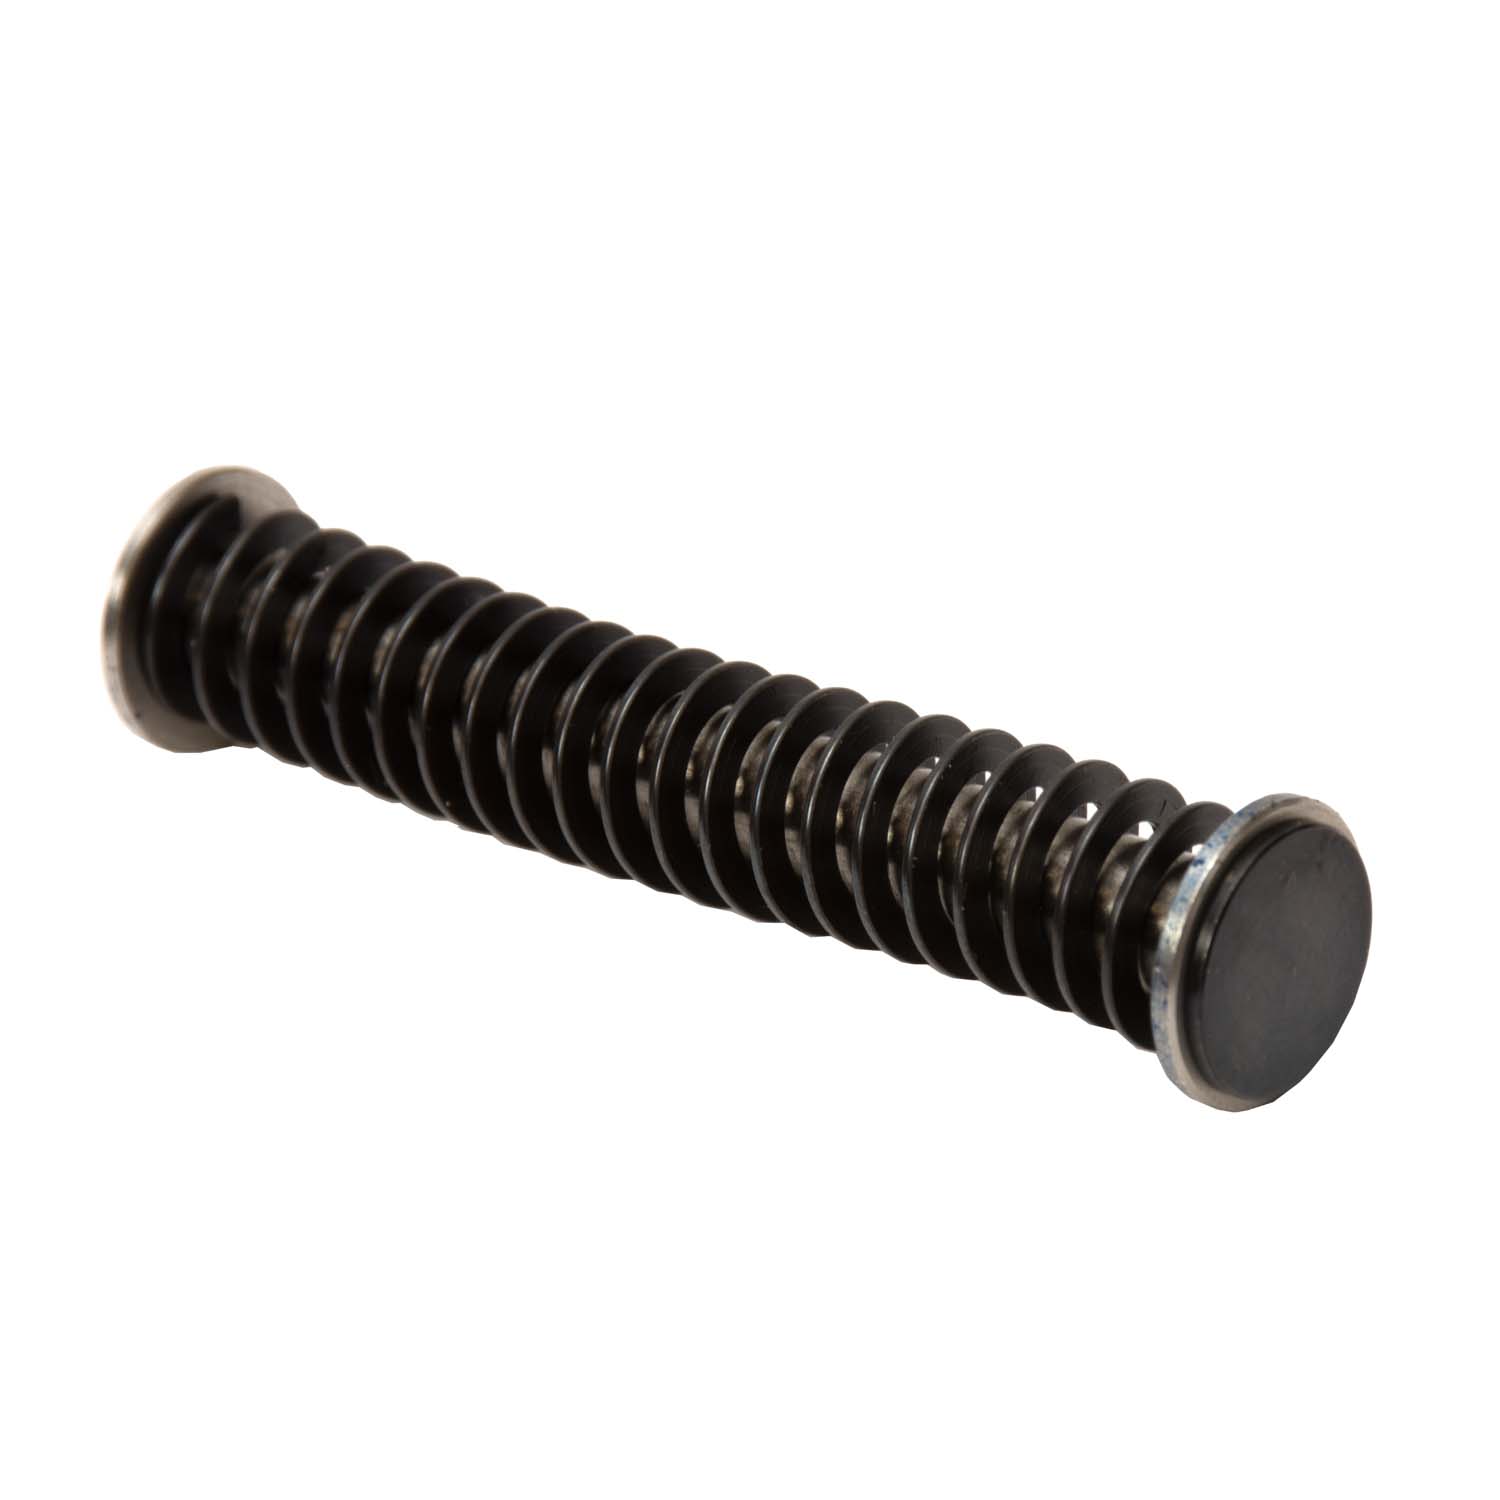 Rival Arms Springfield Hellcat Recoil Spring/Guide Rod Assembly